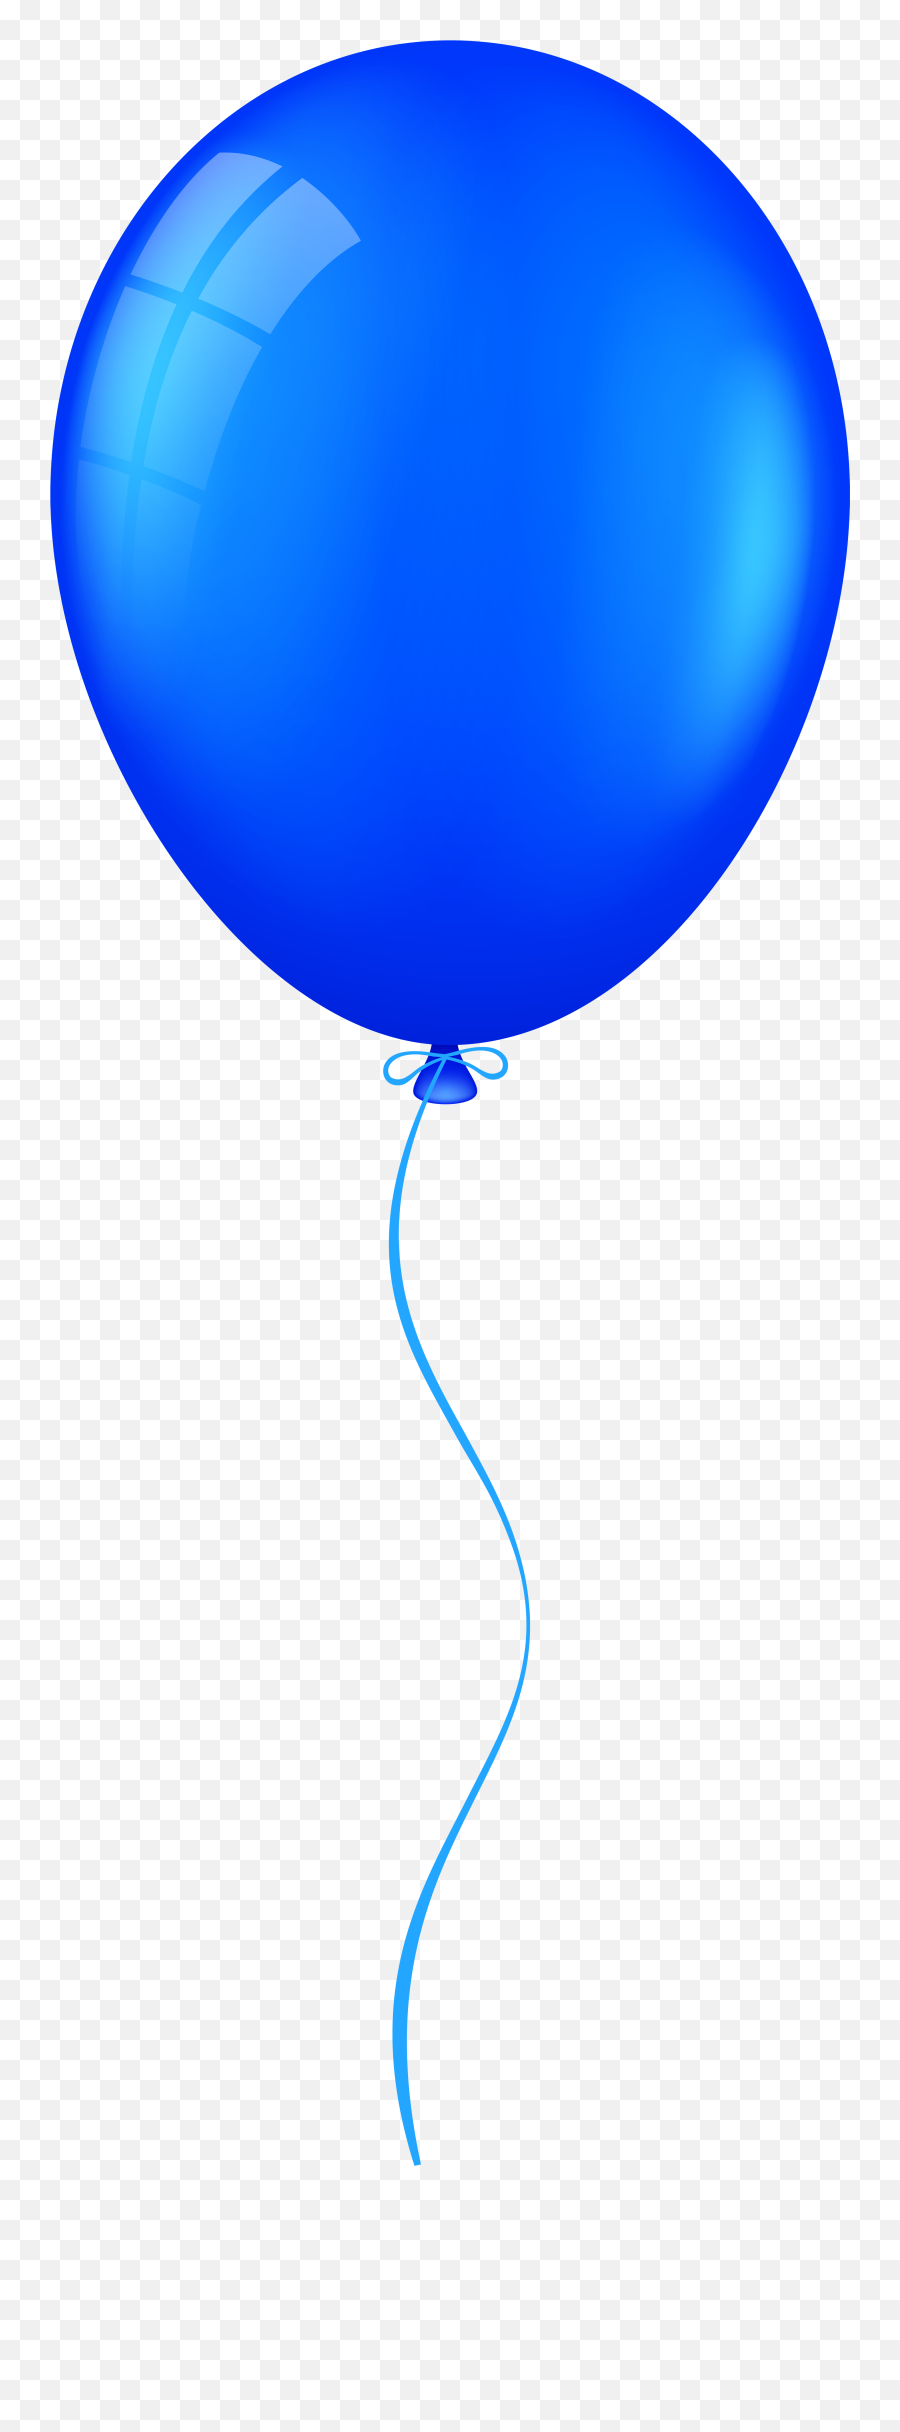 Balloon Transparent - Blue Cartoon Balloon Transparent Background Png,Gold Balloon  Png - free transparent png images 